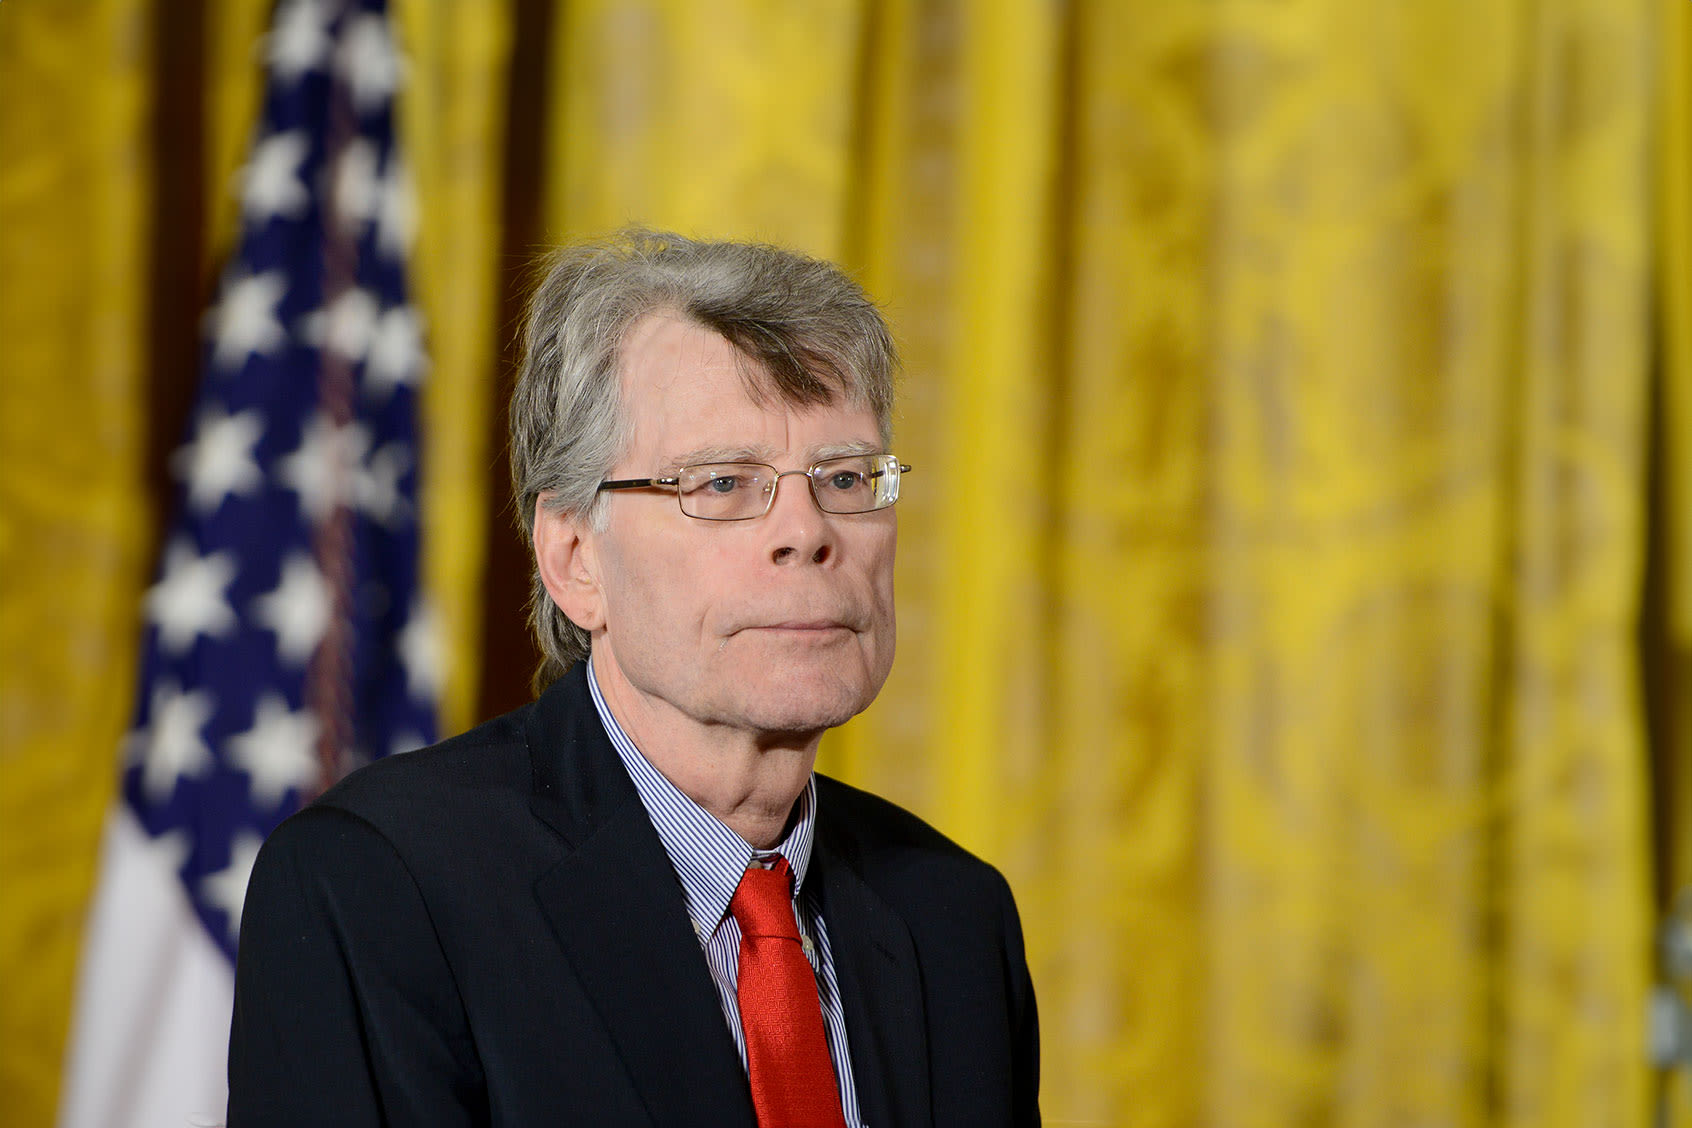 Stephen King: Biden should bow out "in the interests of the America he so clearly loves"